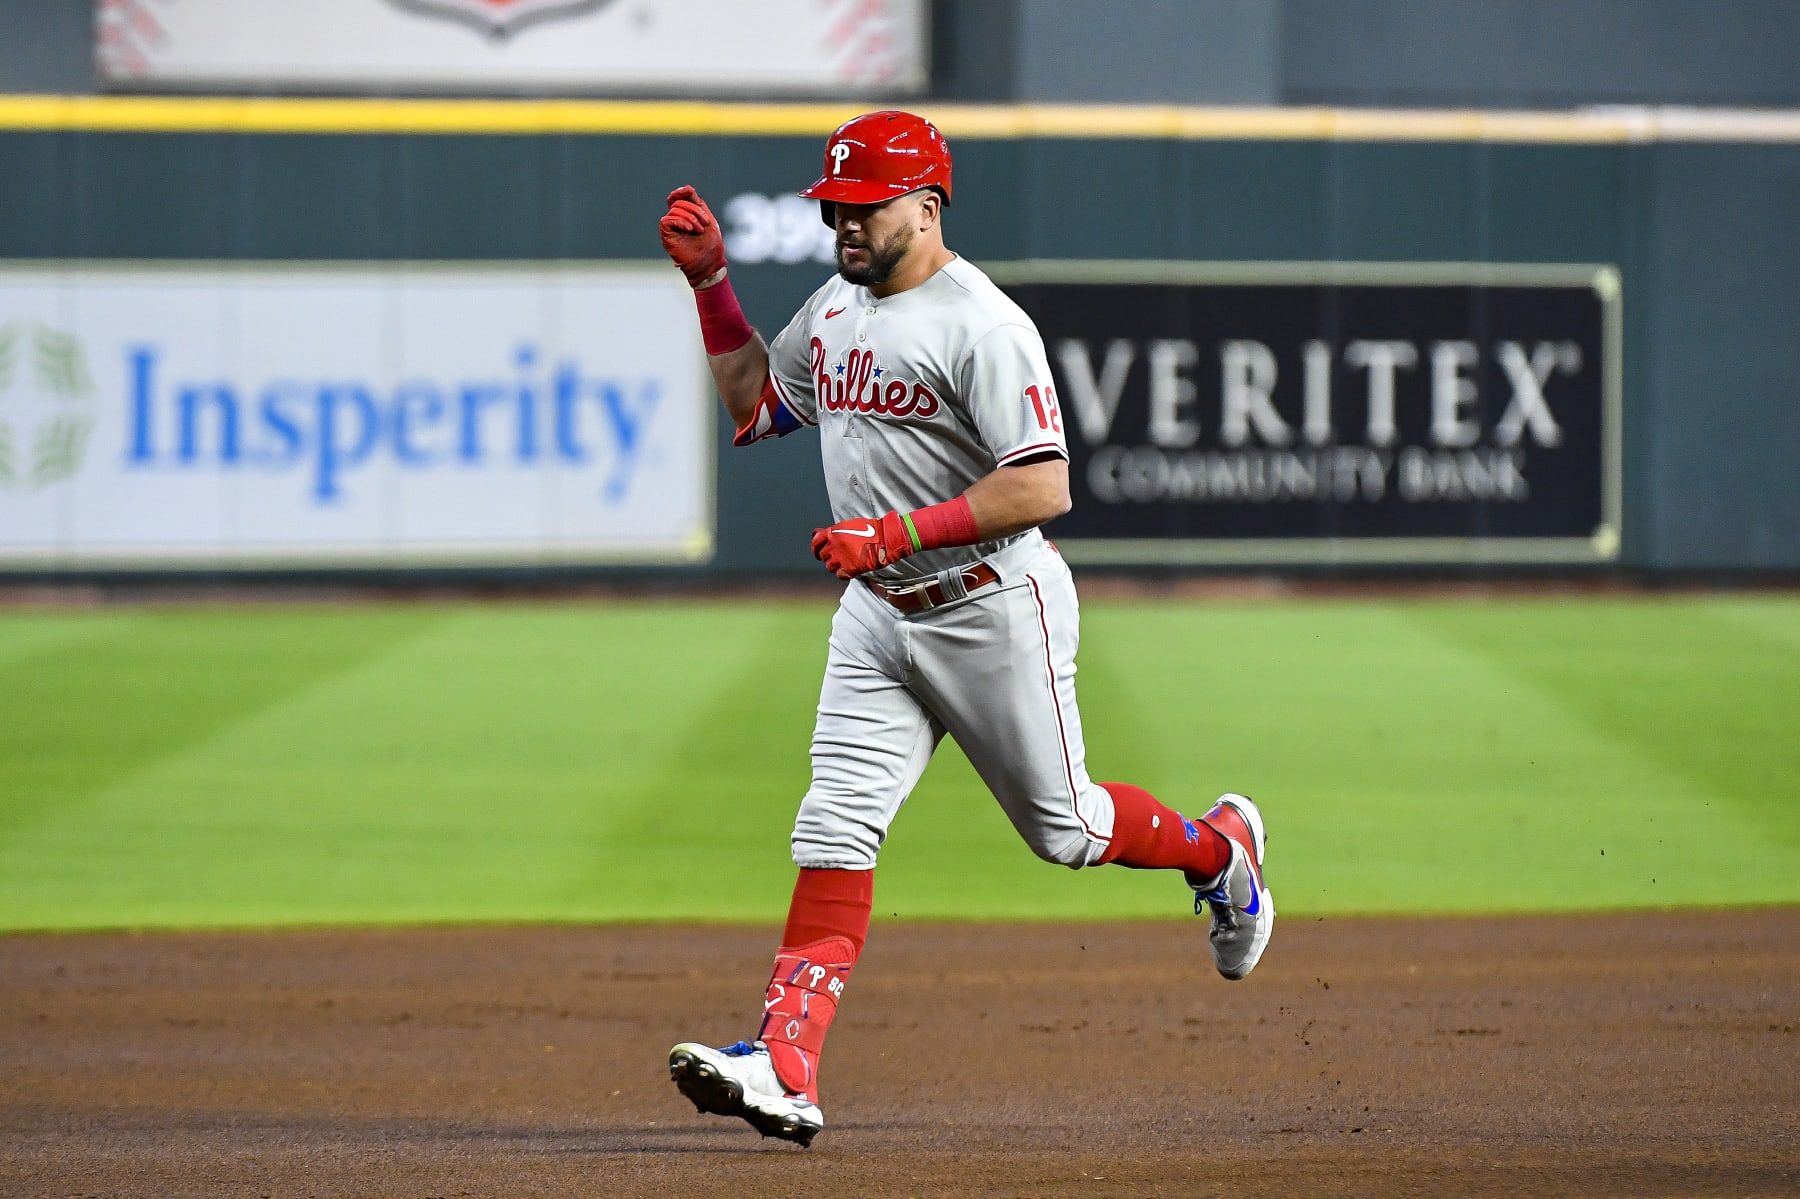 WATCH: The final out for the Phillies to clinch playoff berth – NBC Sports  Philadelphia